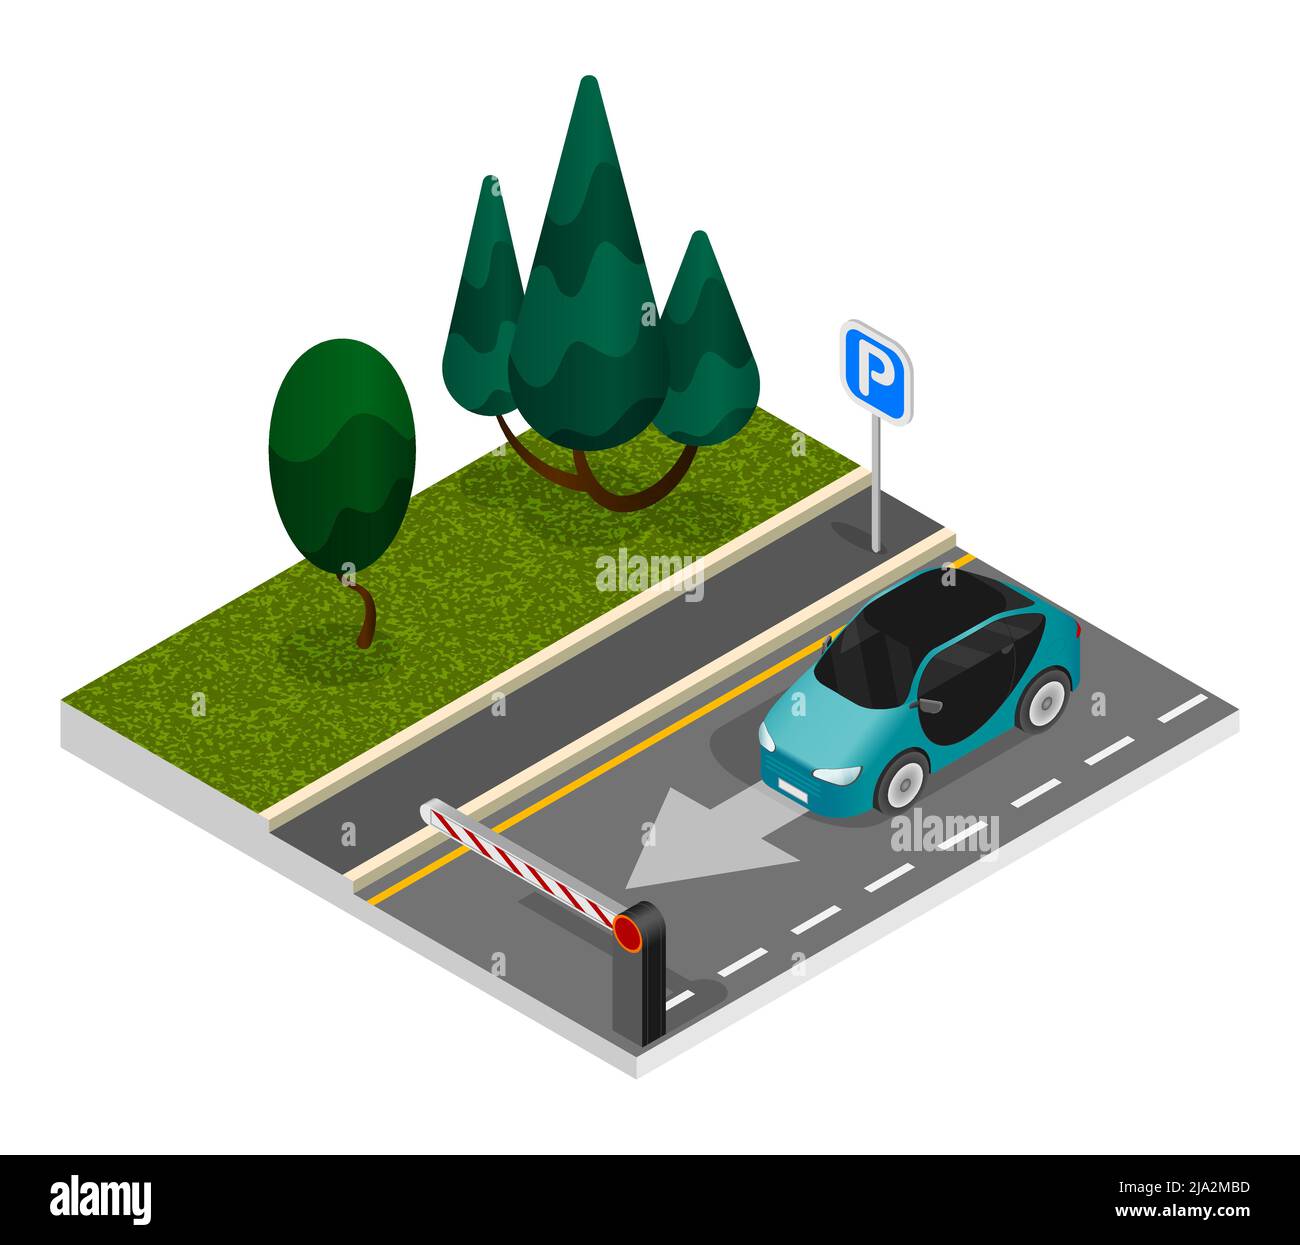 Premium Vector  Valet parking with ticket image and multiple cars on  public car park in flat cartoon illustration